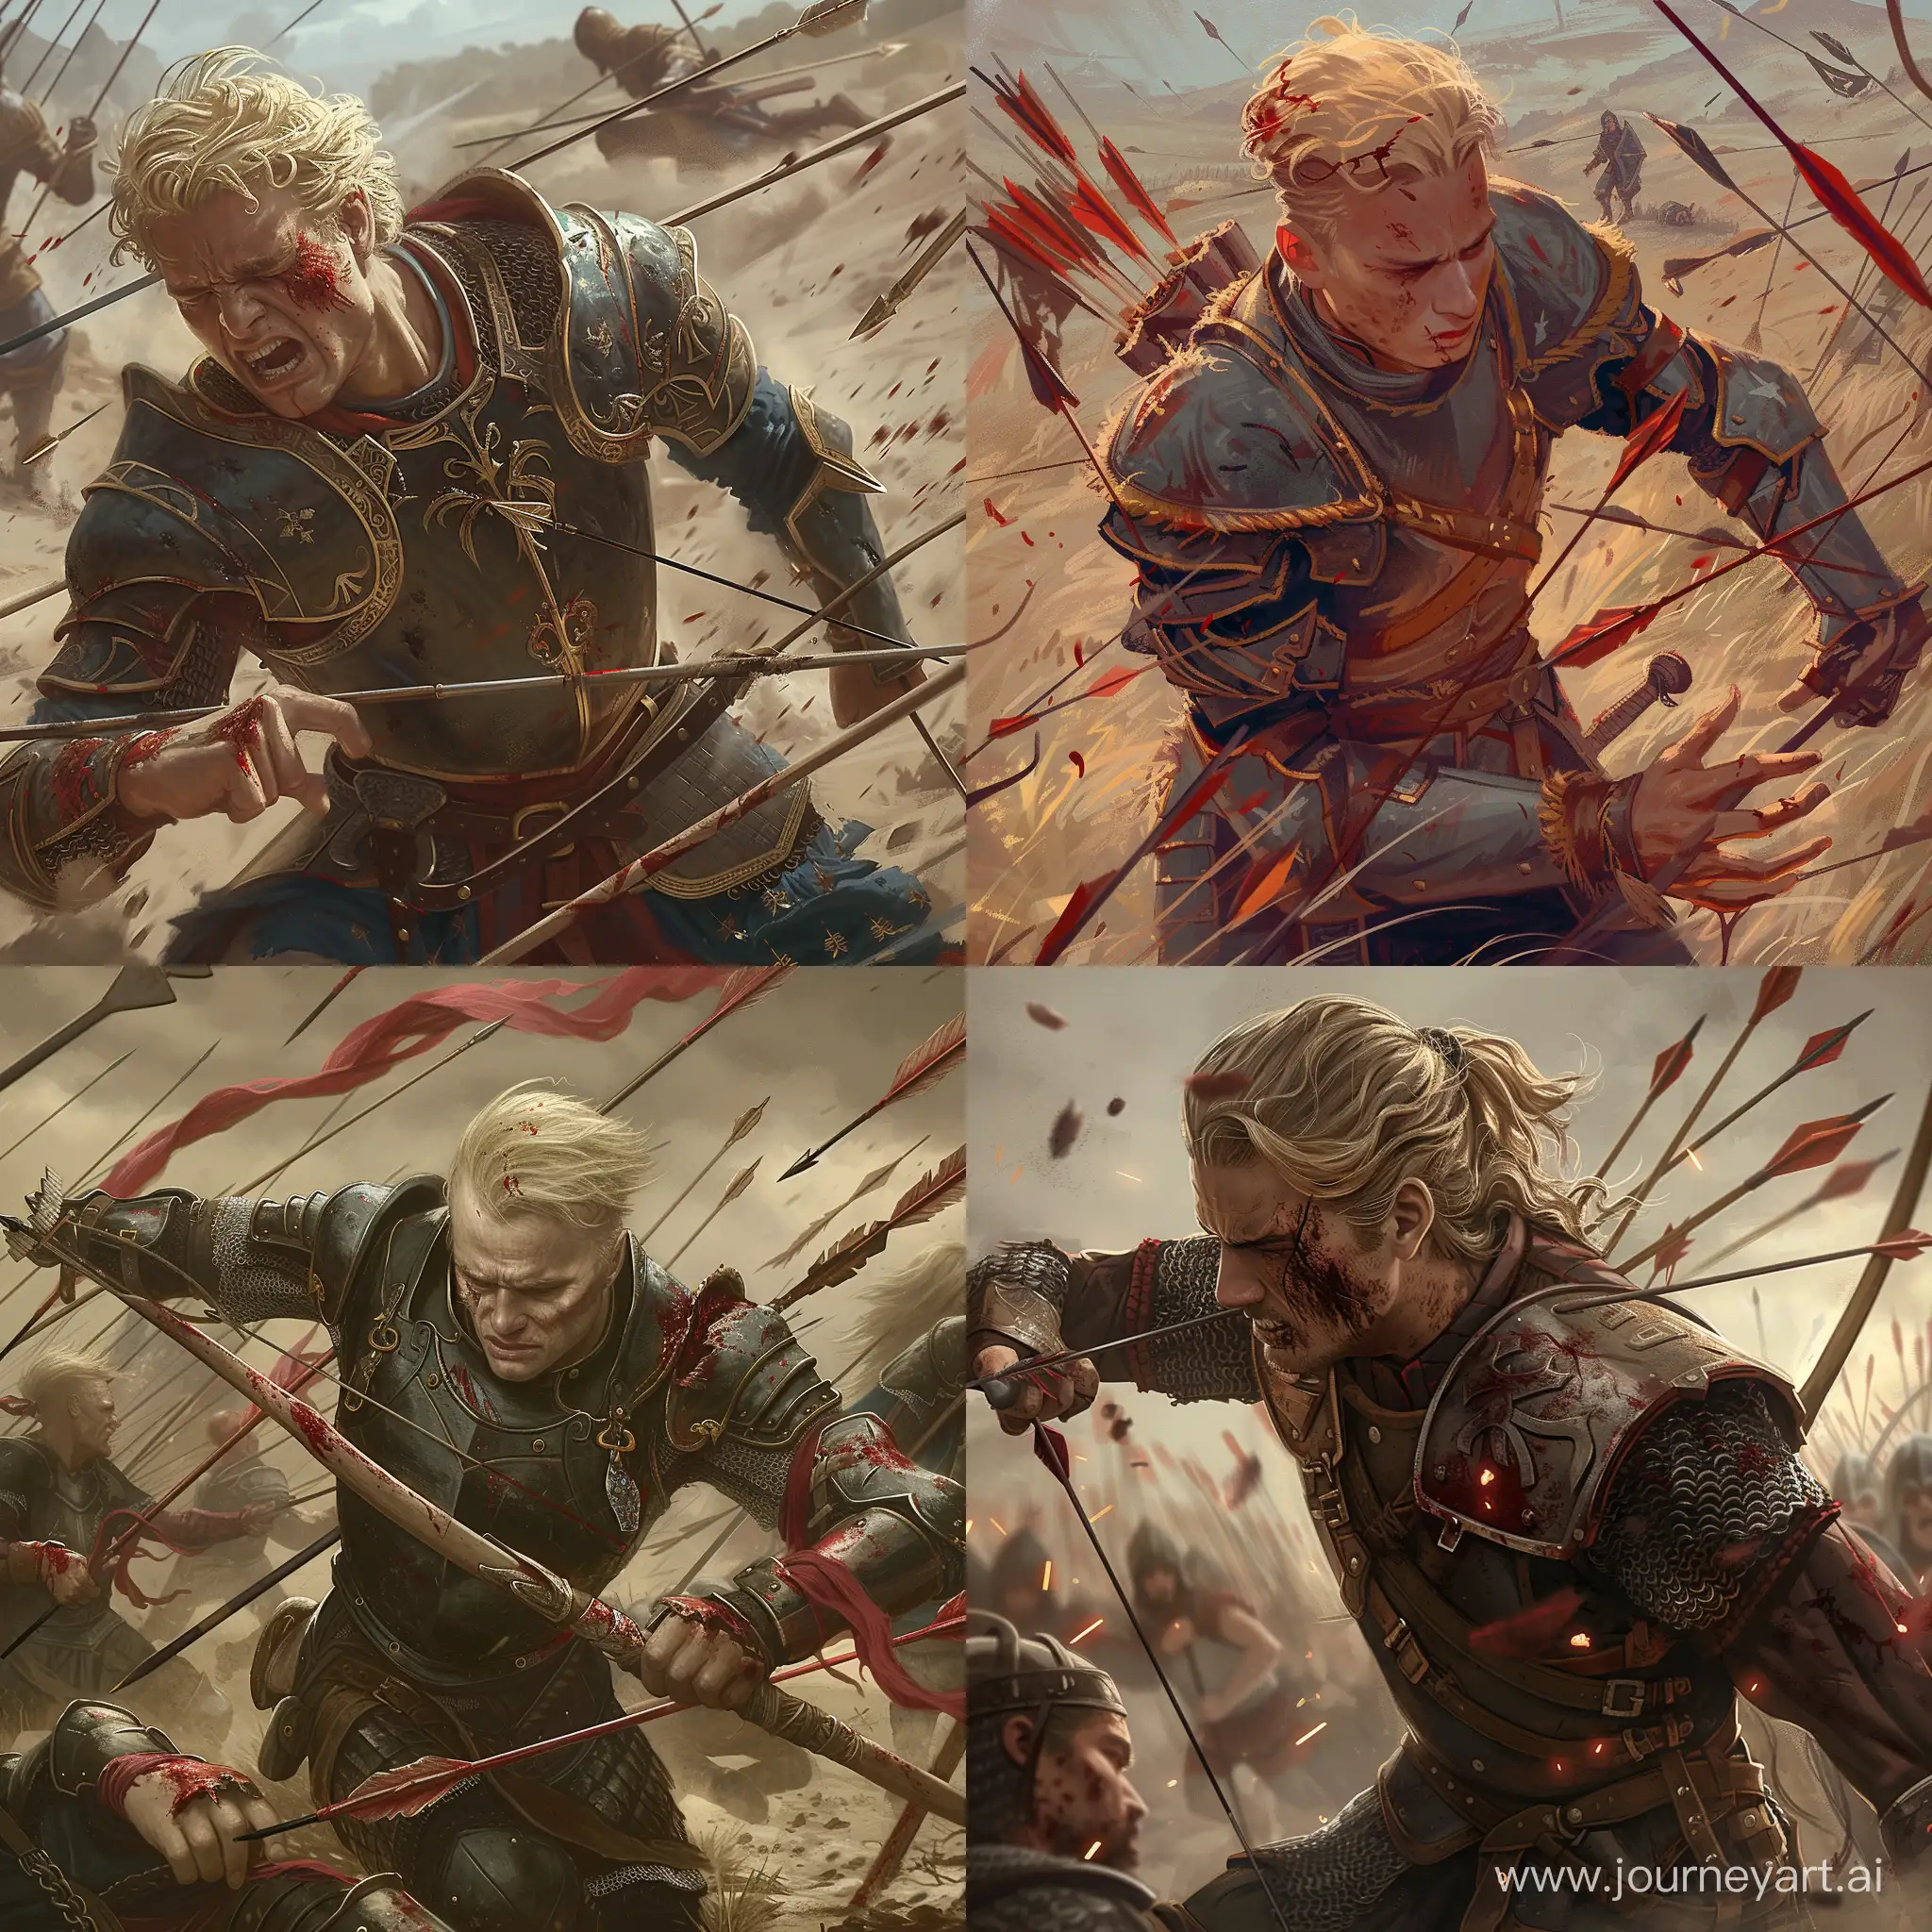 digital art of a battlefield, a man with blond hair in armor is trying to stand up, multiple arrow wounds are on him.